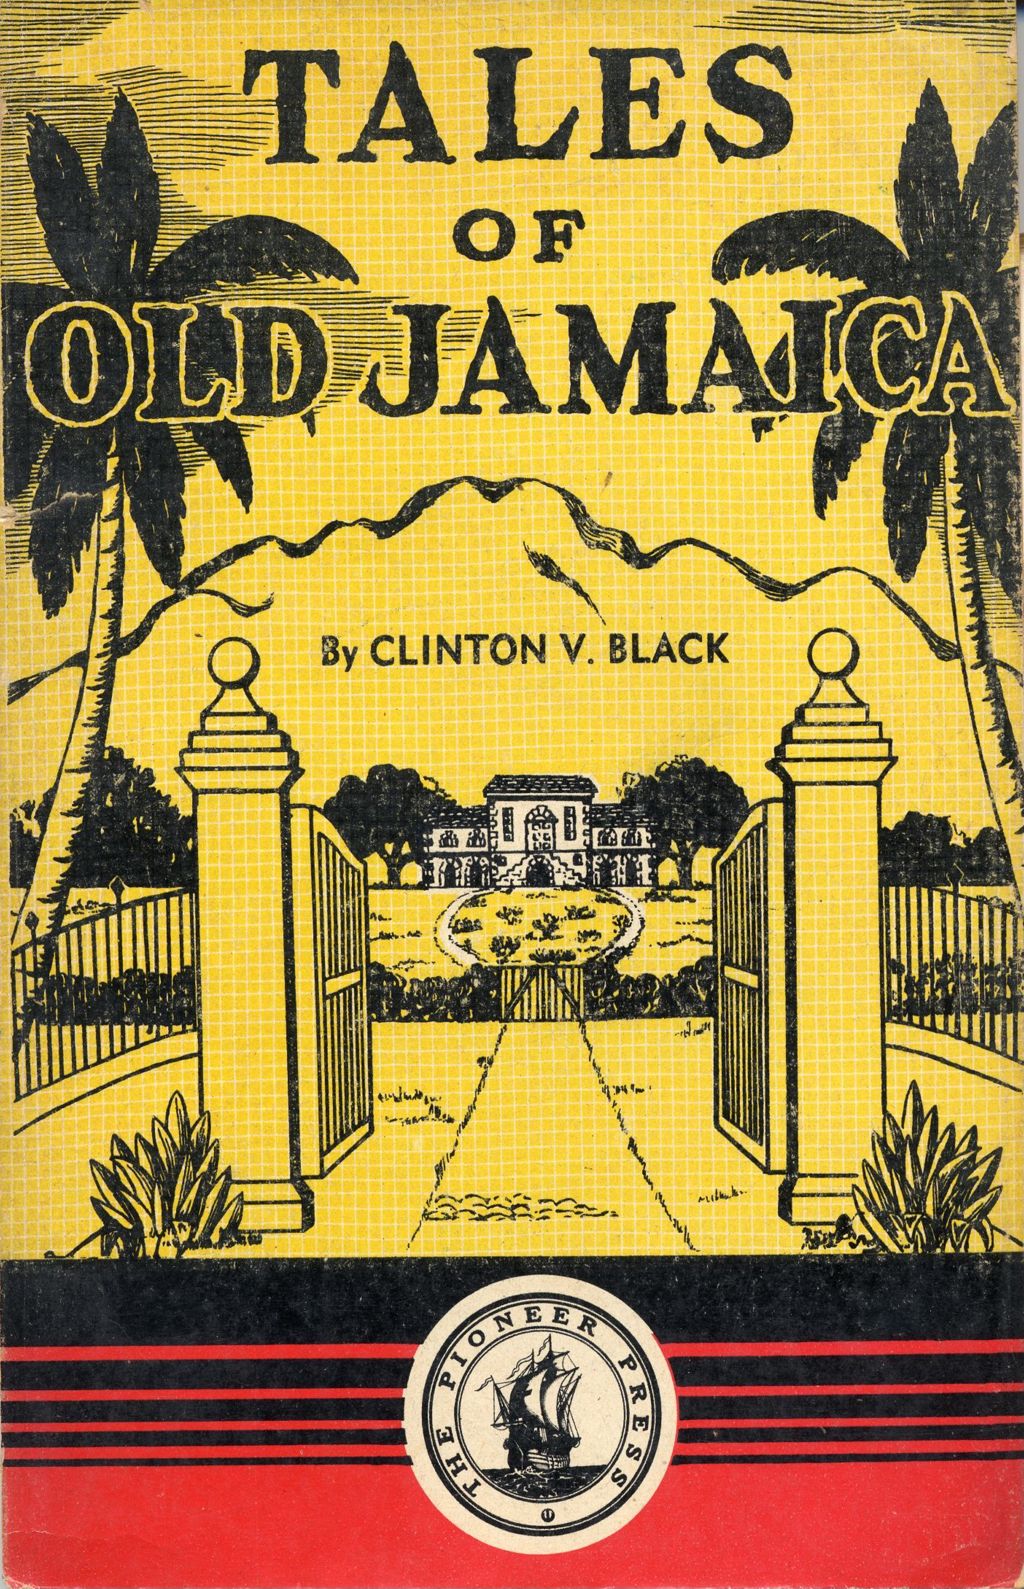 Tales of old Jamaica (front cover)